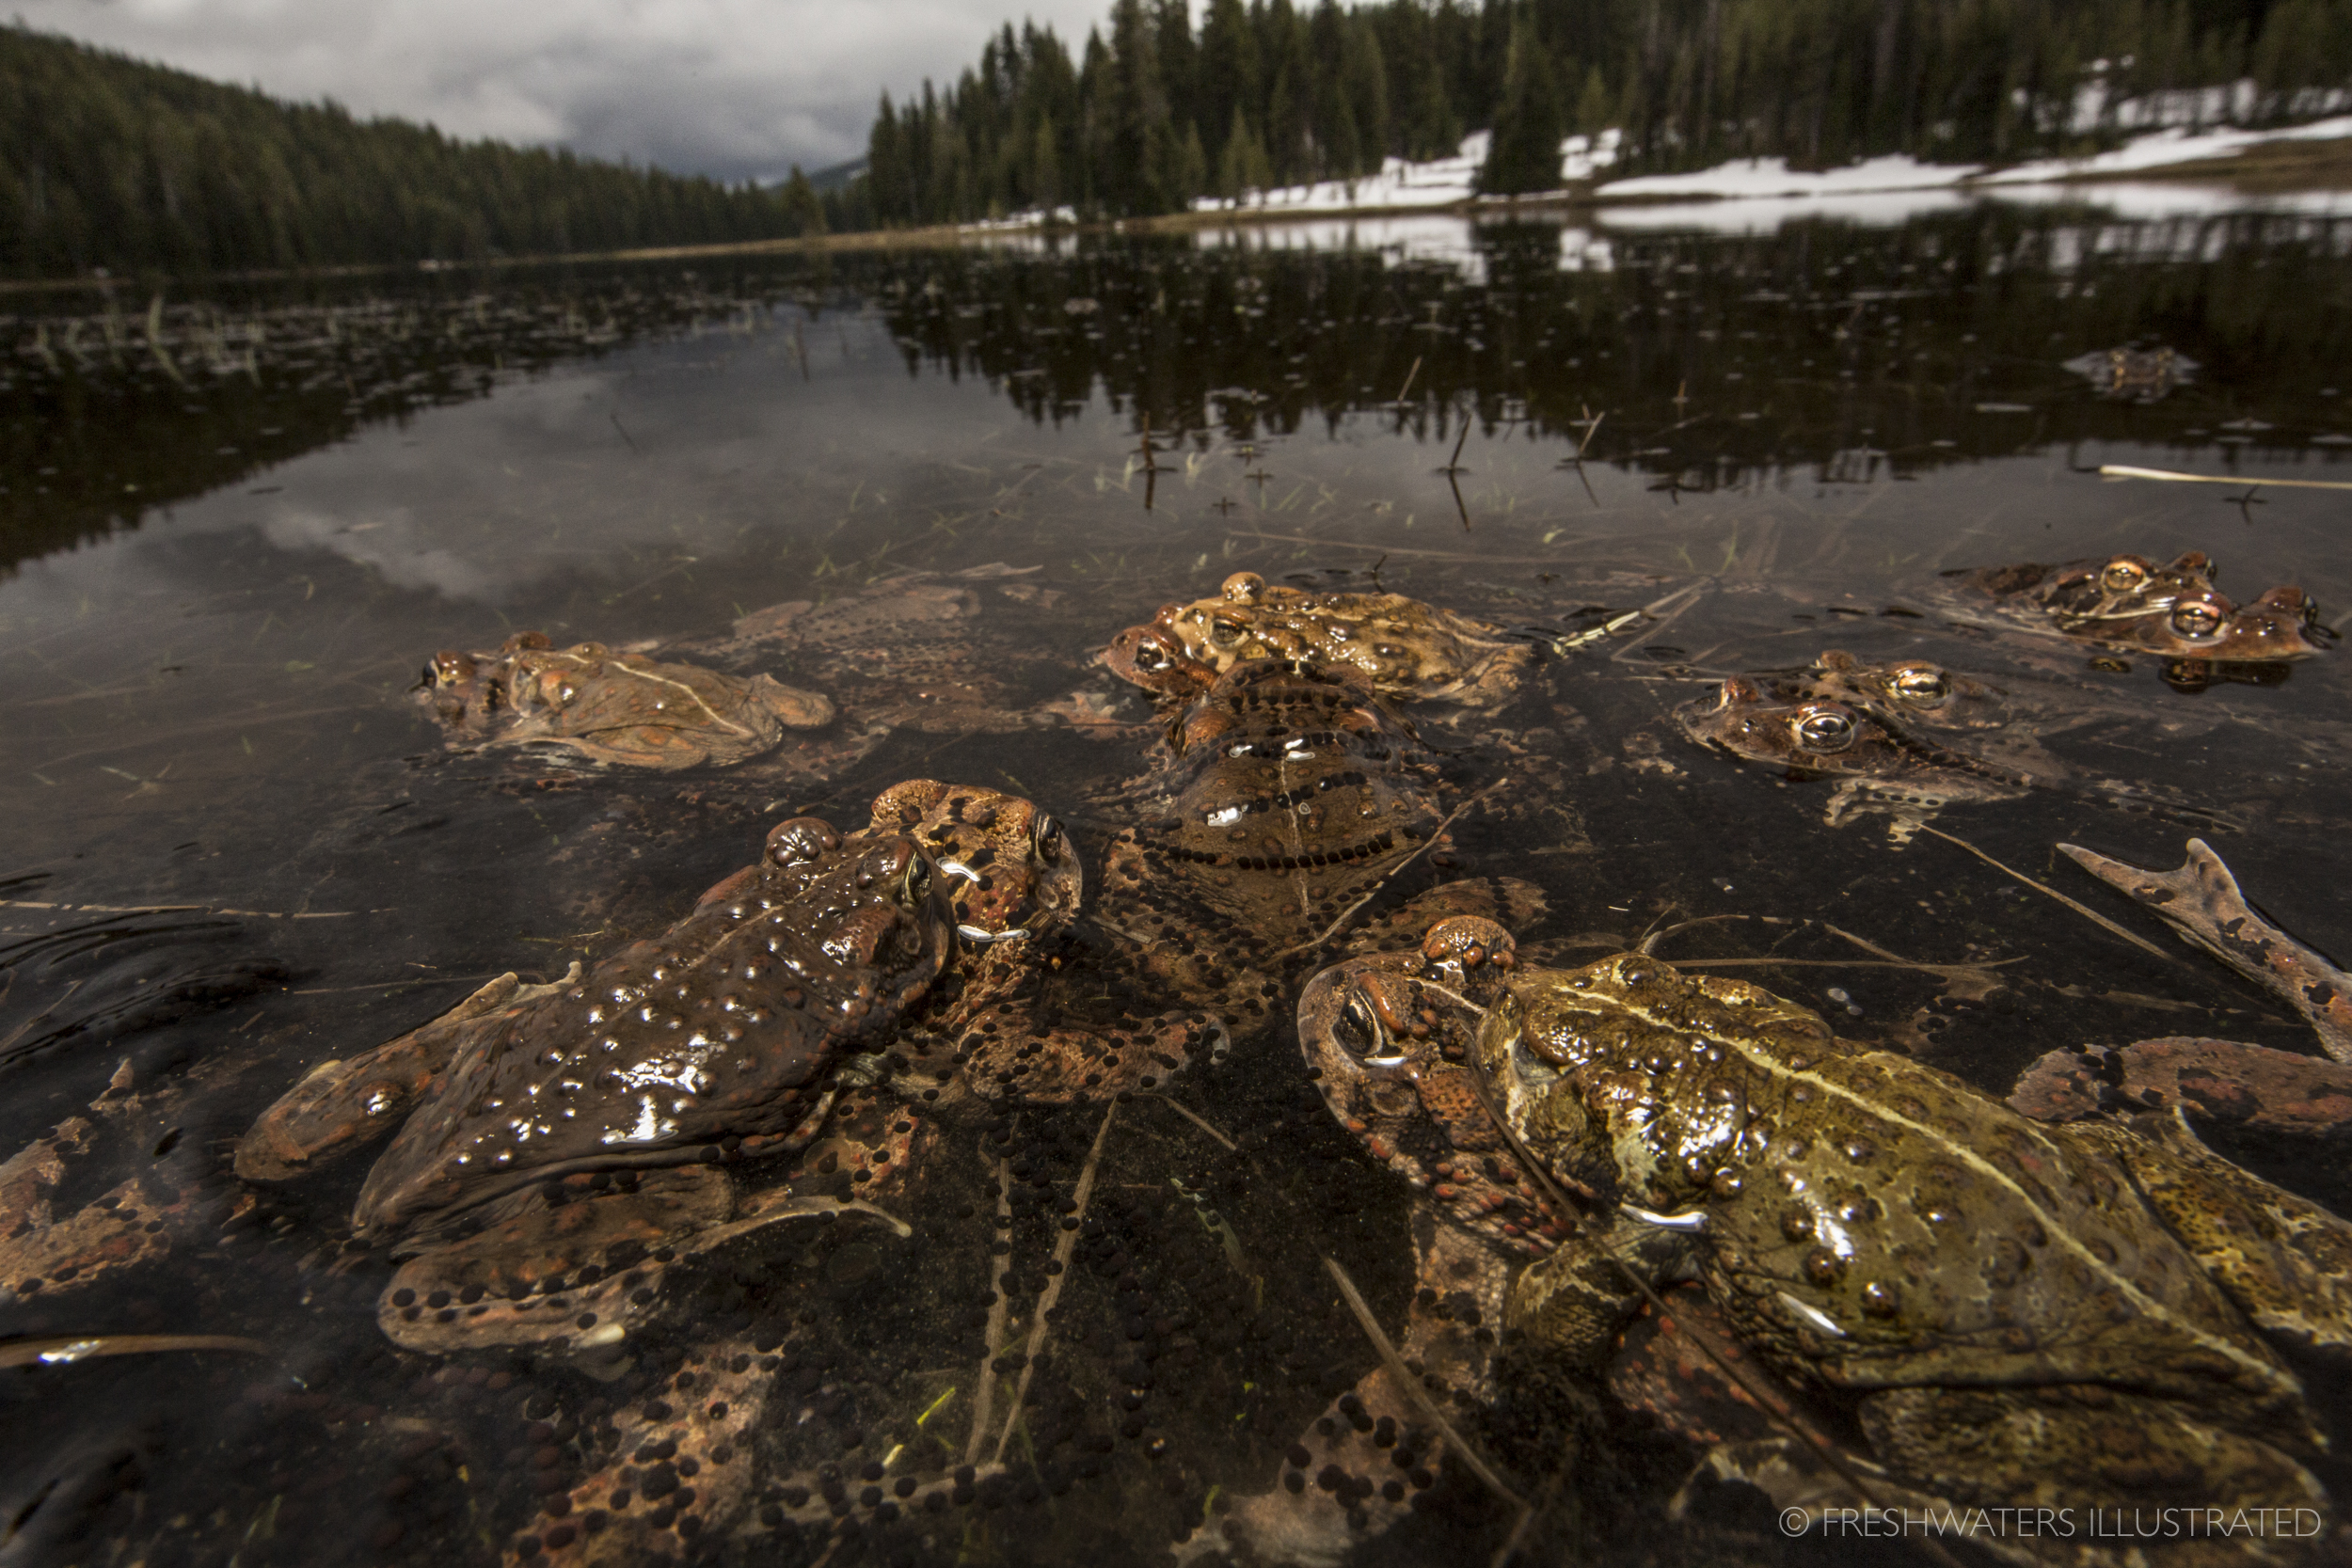  In the shadows of of Oregon's Mount Bachelor hundreds of western toads (Anaxyrus boreas) are on the move in search of potential mates. The alpinists of the amphibian world, these tough mountain toads emerge to breed right as the snowpack and ice beg